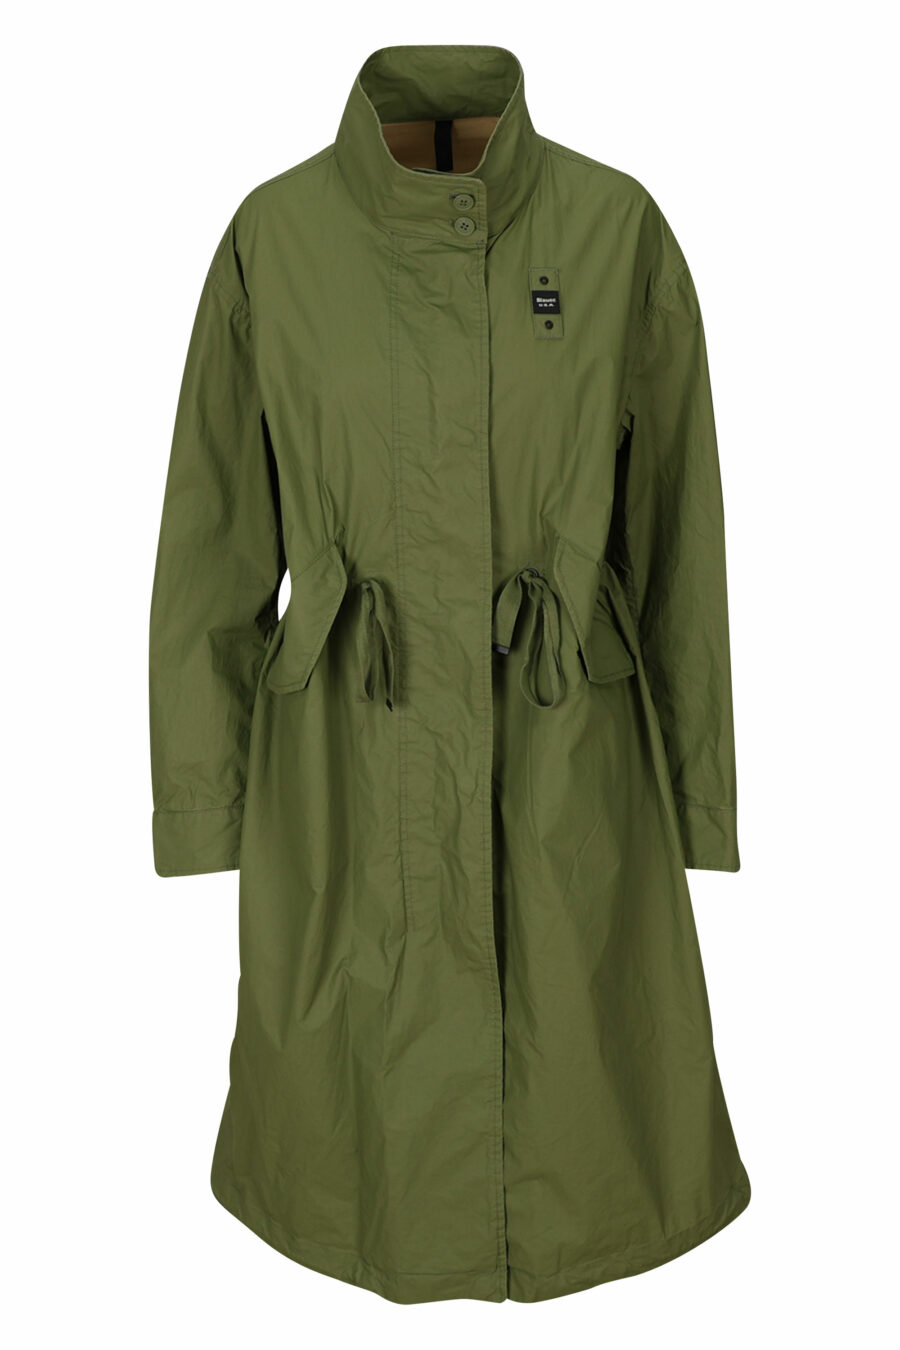 Military green waterproof trench coat with side logo - 8058610764999